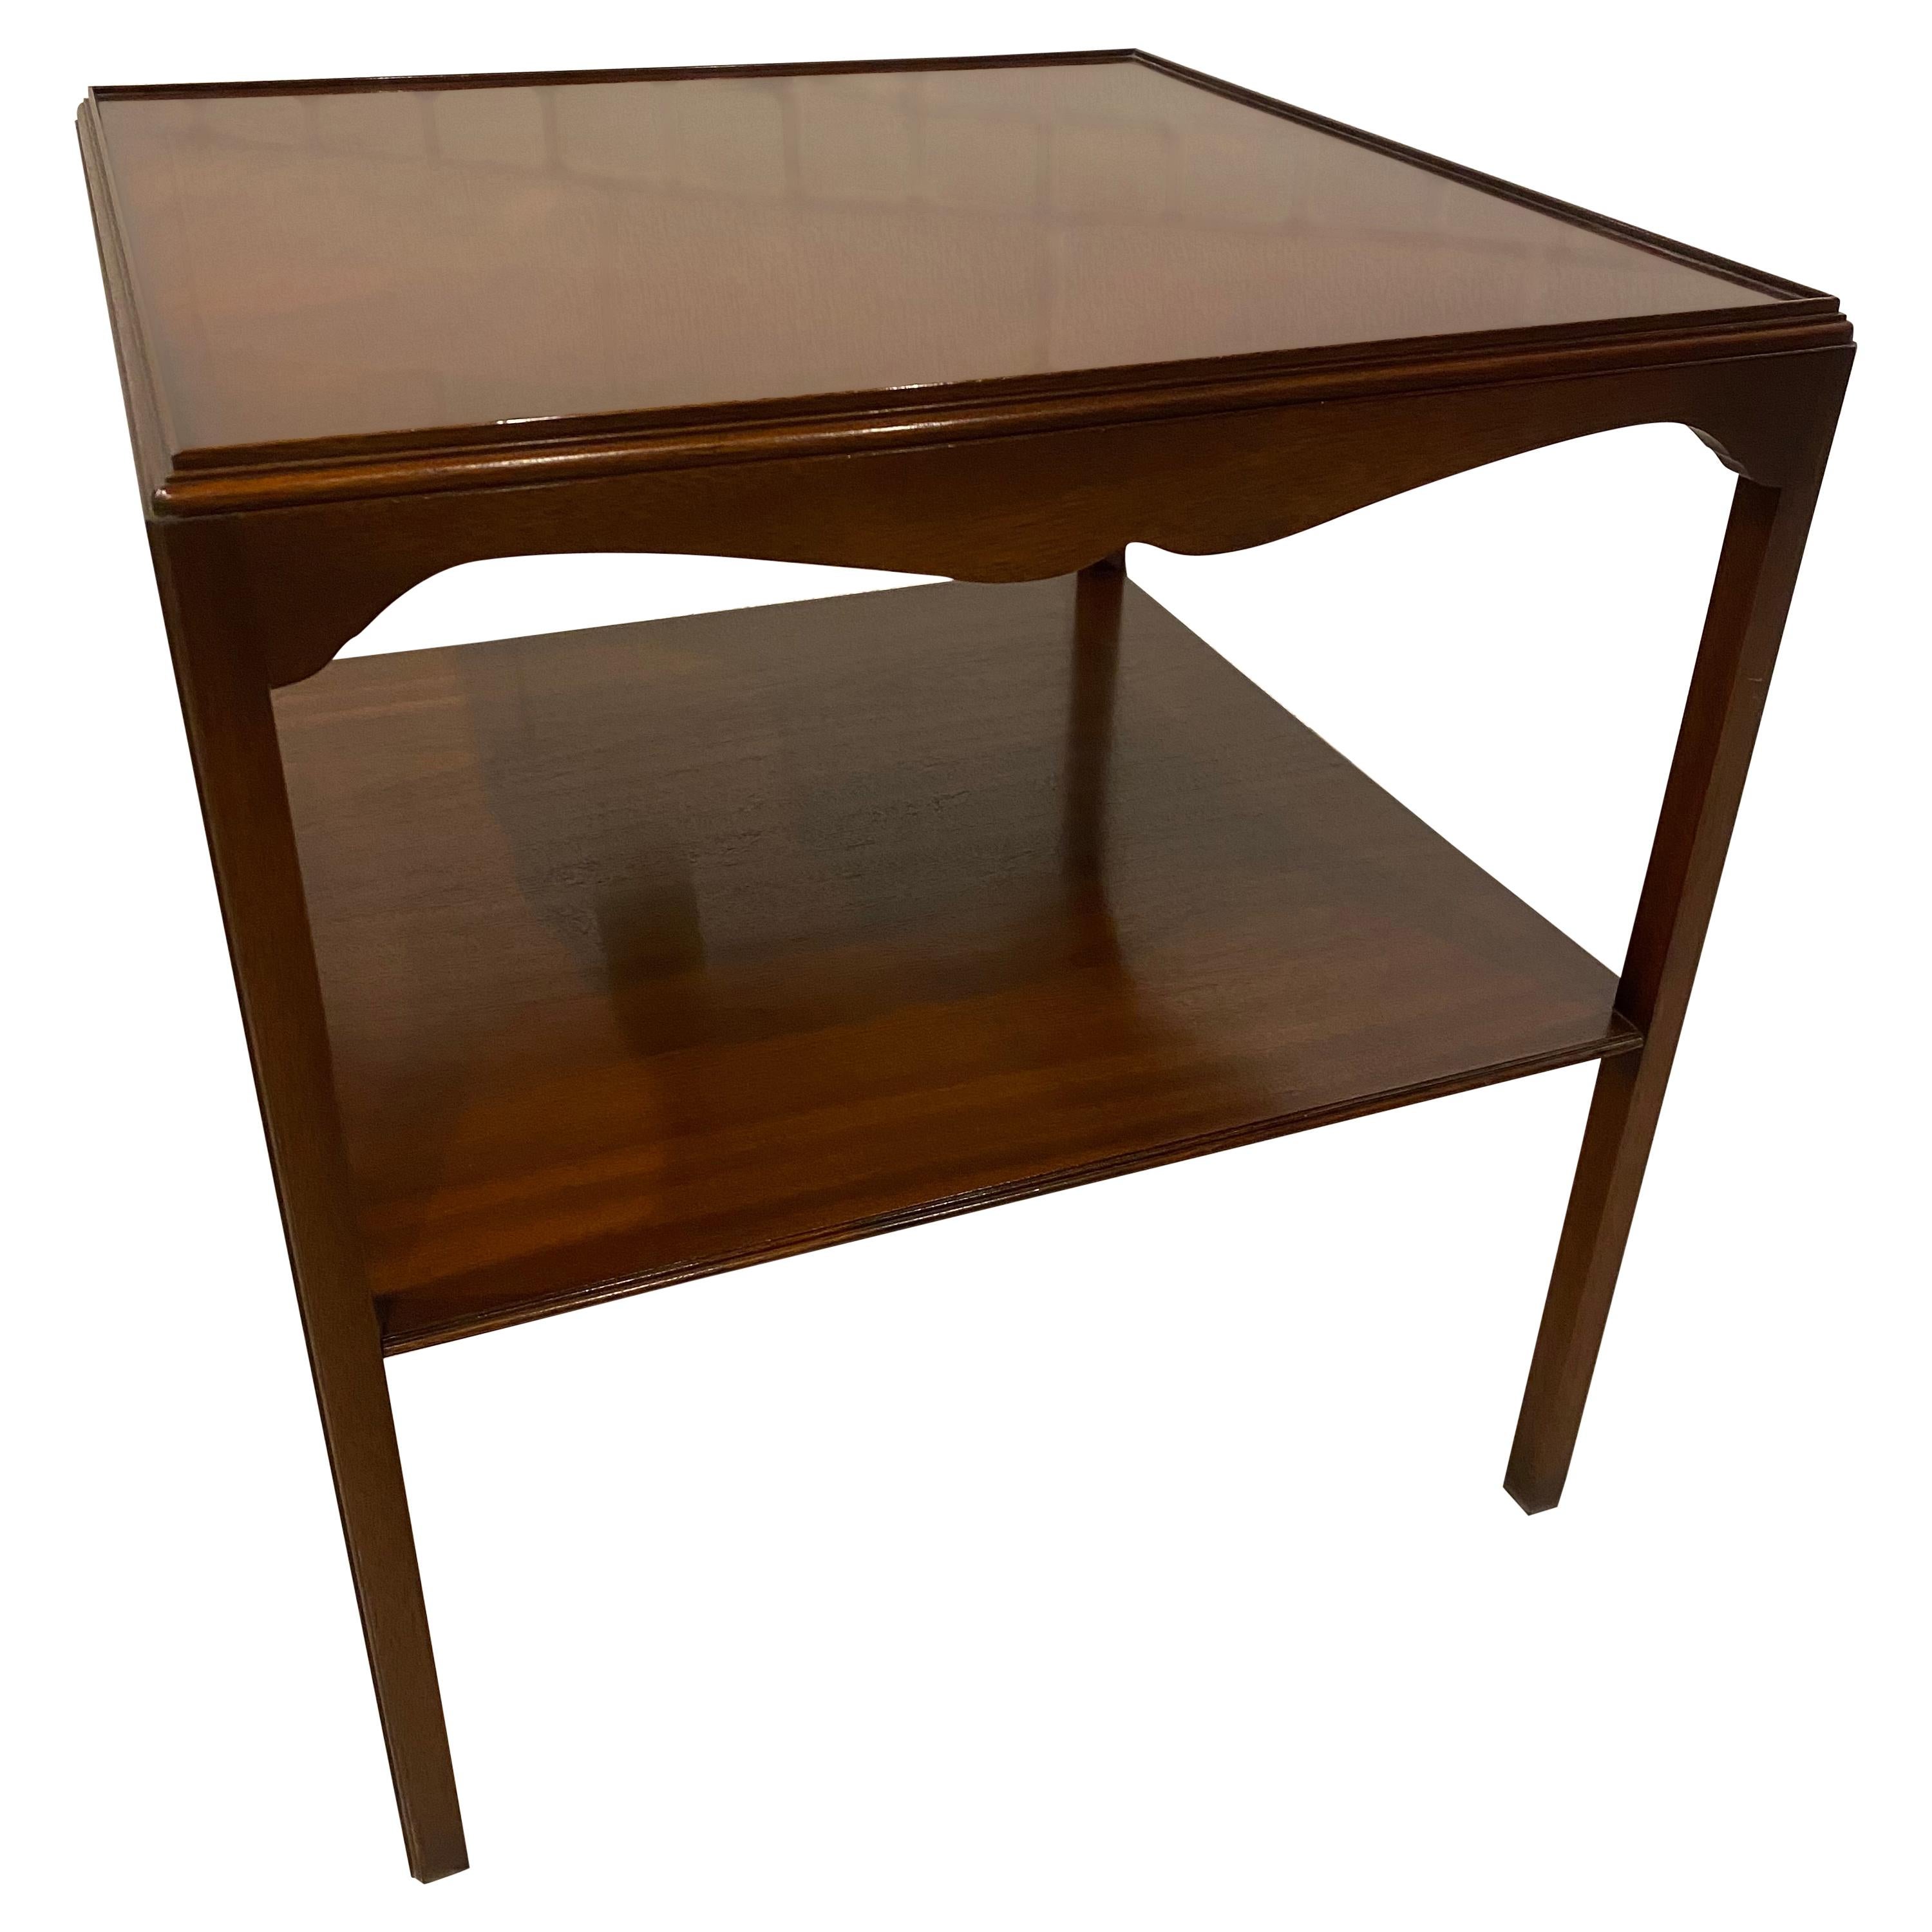 Georgian Style Side Table, Mahogany, English by Bevan Funnel, Two Tiers